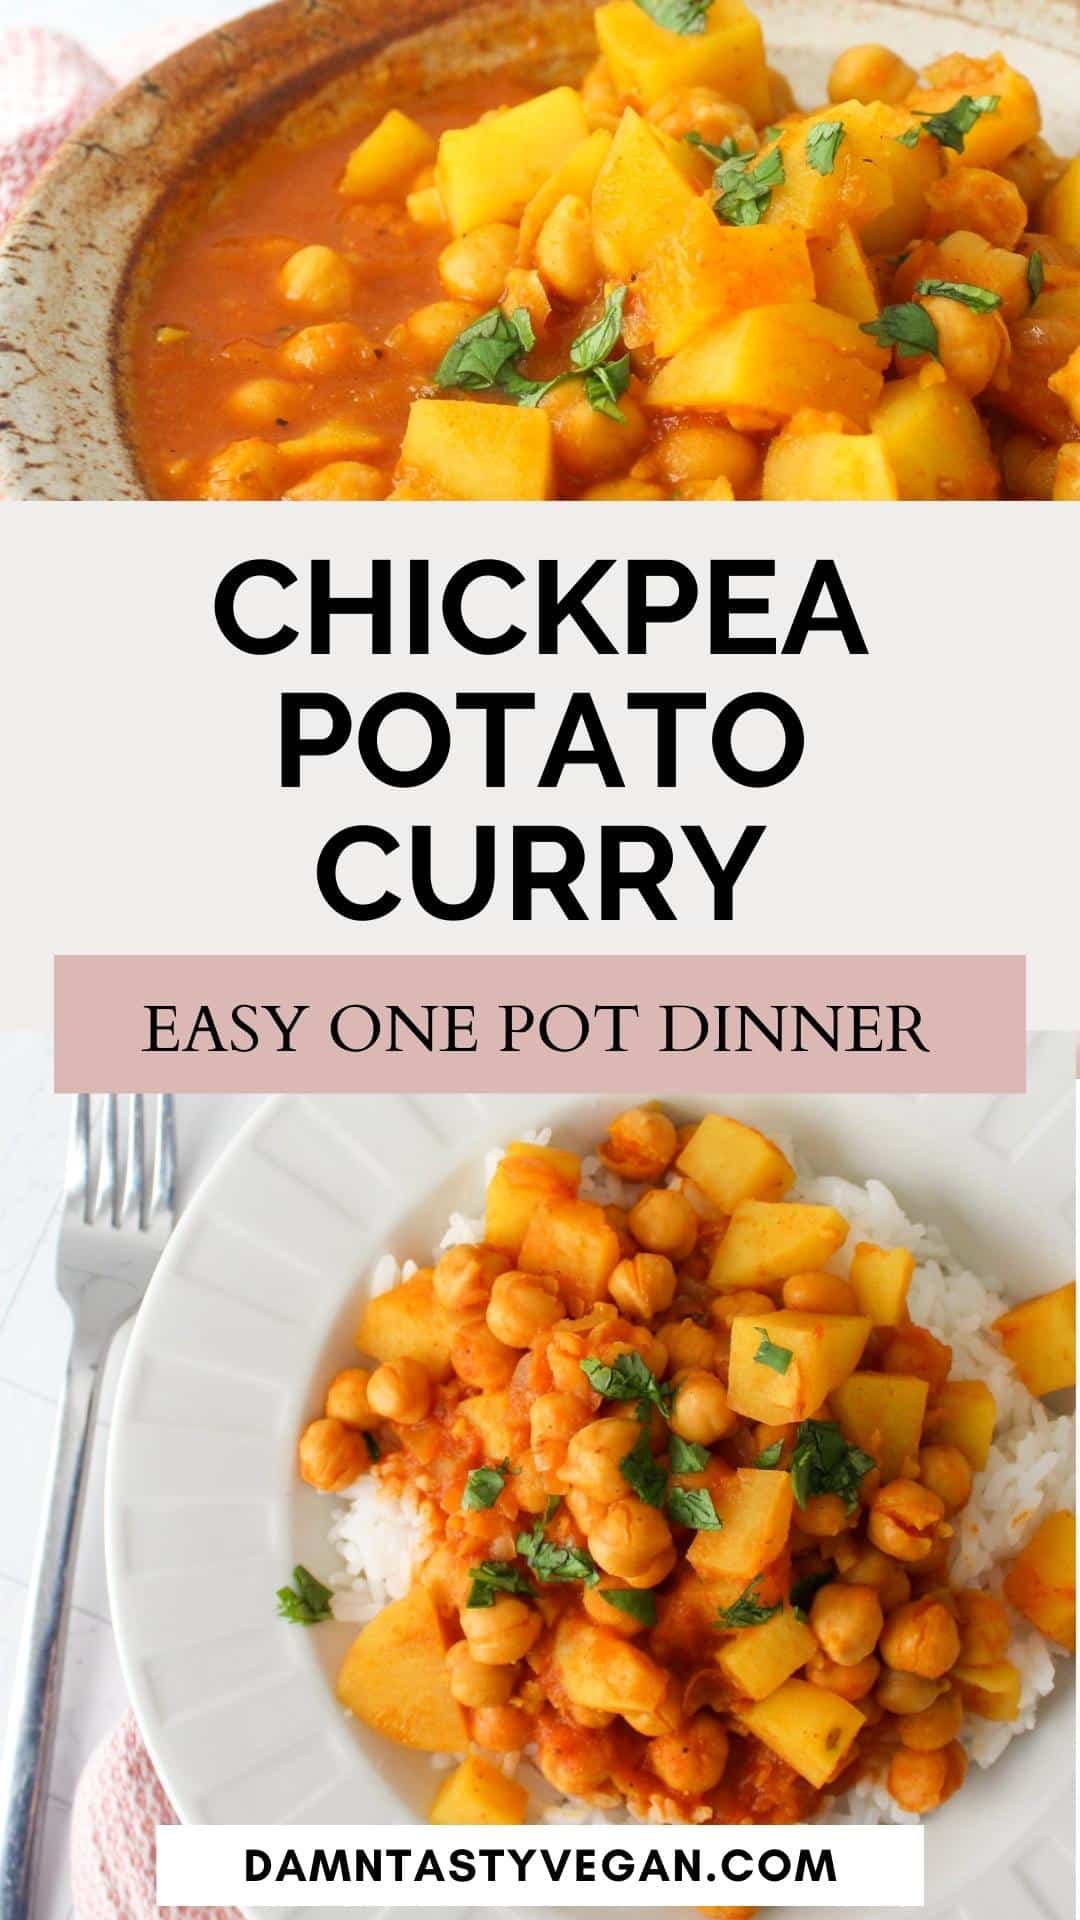 Chickpea and potato curry image for pinterest